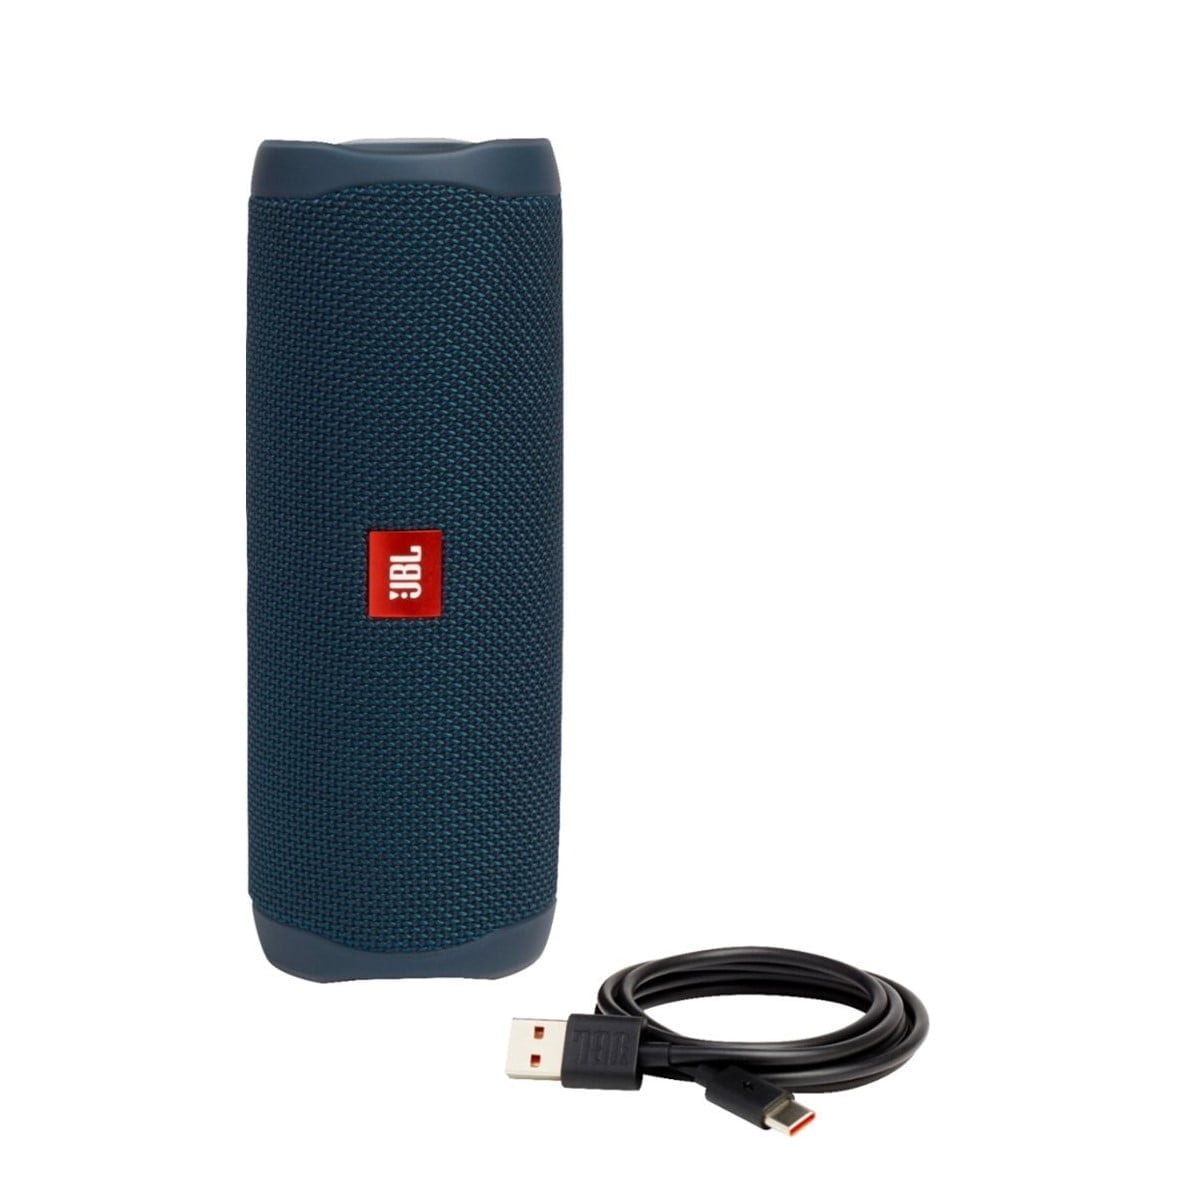 6356539Cv13D Jbl &Lt;H1&Gt;Jbl Flip 5 Portable Bluetooth Wireless Speaker - Ocean Blue&Lt;/H1&Gt; Https://Www.youtube.com/Watch?V=C8K7Ldyhyfm &Lt;Ul&Gt; &Lt;Li&Gt;&Lt;Span Class=&Quot;A-List-Item&Quot;&Gt;Sounds Better Than Ever, Feel Your Music. Flip 5’S All New Racetrack-Shaped Driver Delivers High Output. Enjoy Booming, Bass In A Compact Package. &Lt;/Span&Gt;&Lt;/Li&Gt; &Lt;Li&Gt;&Lt;Span Class=&Quot;A-List-Item&Quot;&Gt; Make A Splash With Ipx7 Waterproof Design. Flip 5 Is Ipx7 Waterproof Up To Three-Feet Deep For Fearless Outdoor Entertainment. &Lt;/Span&Gt;&Lt;/Li&Gt; &Lt;Li&Gt;&Lt;Span Class=&Quot;A-List-Item&Quot;&Gt; Crank Up The Fun With Party Boost, Party Boost Allows You To Pair Two Jbl Party Boost-Compatible Speakers Together For Stereo, Sound Or To Pump Up Your Party. &Lt;/Span&Gt;&Lt;/Li&Gt; &Lt;Li&Gt;&Lt;Span Class=&Quot;A-List-Item&Quot;&Gt; Bring The Party Anywhere, Don’t Sweat The Small Stuff Like Charging Your Battery. Flip 5 Gives You More Than 12 Hours Of, Playtime. Keep The Music Going Longer And Louder With Jbl’s Signature Sound. &Lt;/Span&Gt;&Lt;/Li&Gt; &Lt;/Ul&Gt; Jbl Flip5 Jbl Flip 5 Portable Bluetooth Wireless Speaker - Ocean Blue